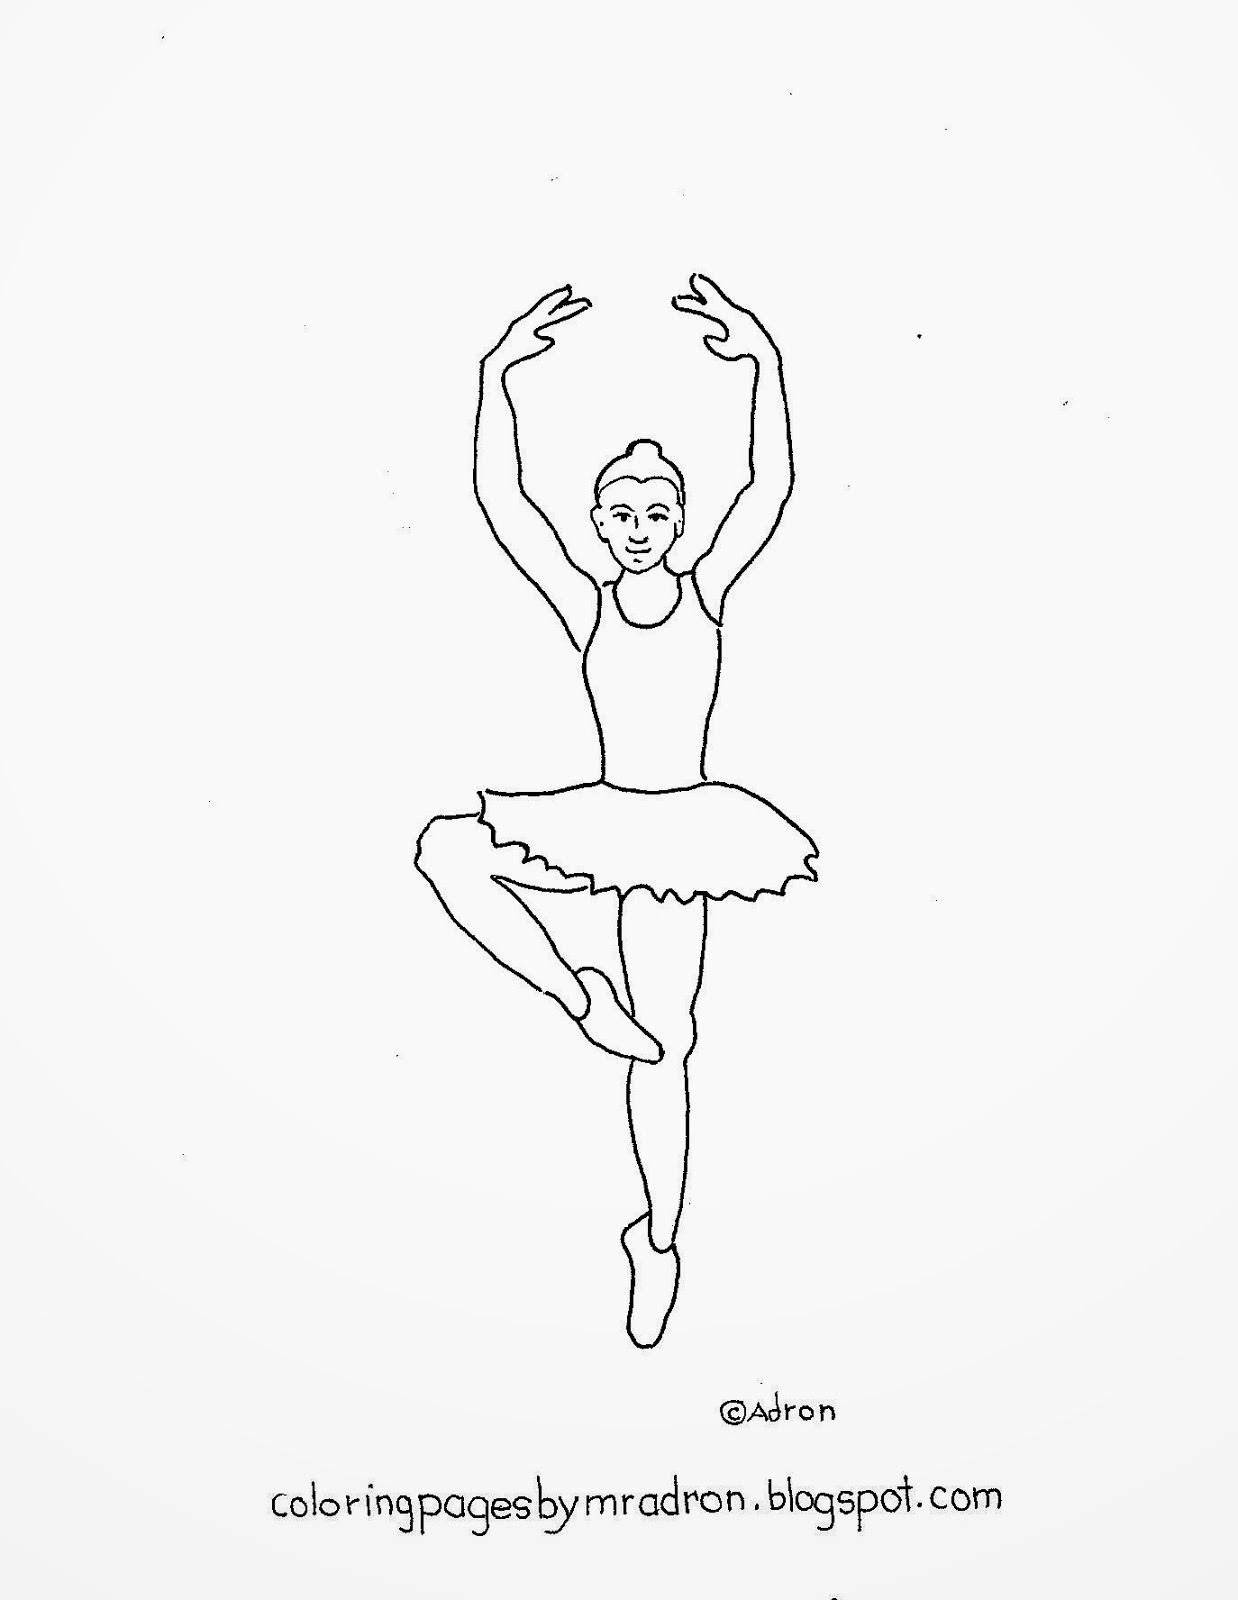 coloring-pages-for-kids-by-mr-adron-printable-ballerina-on-one-leg